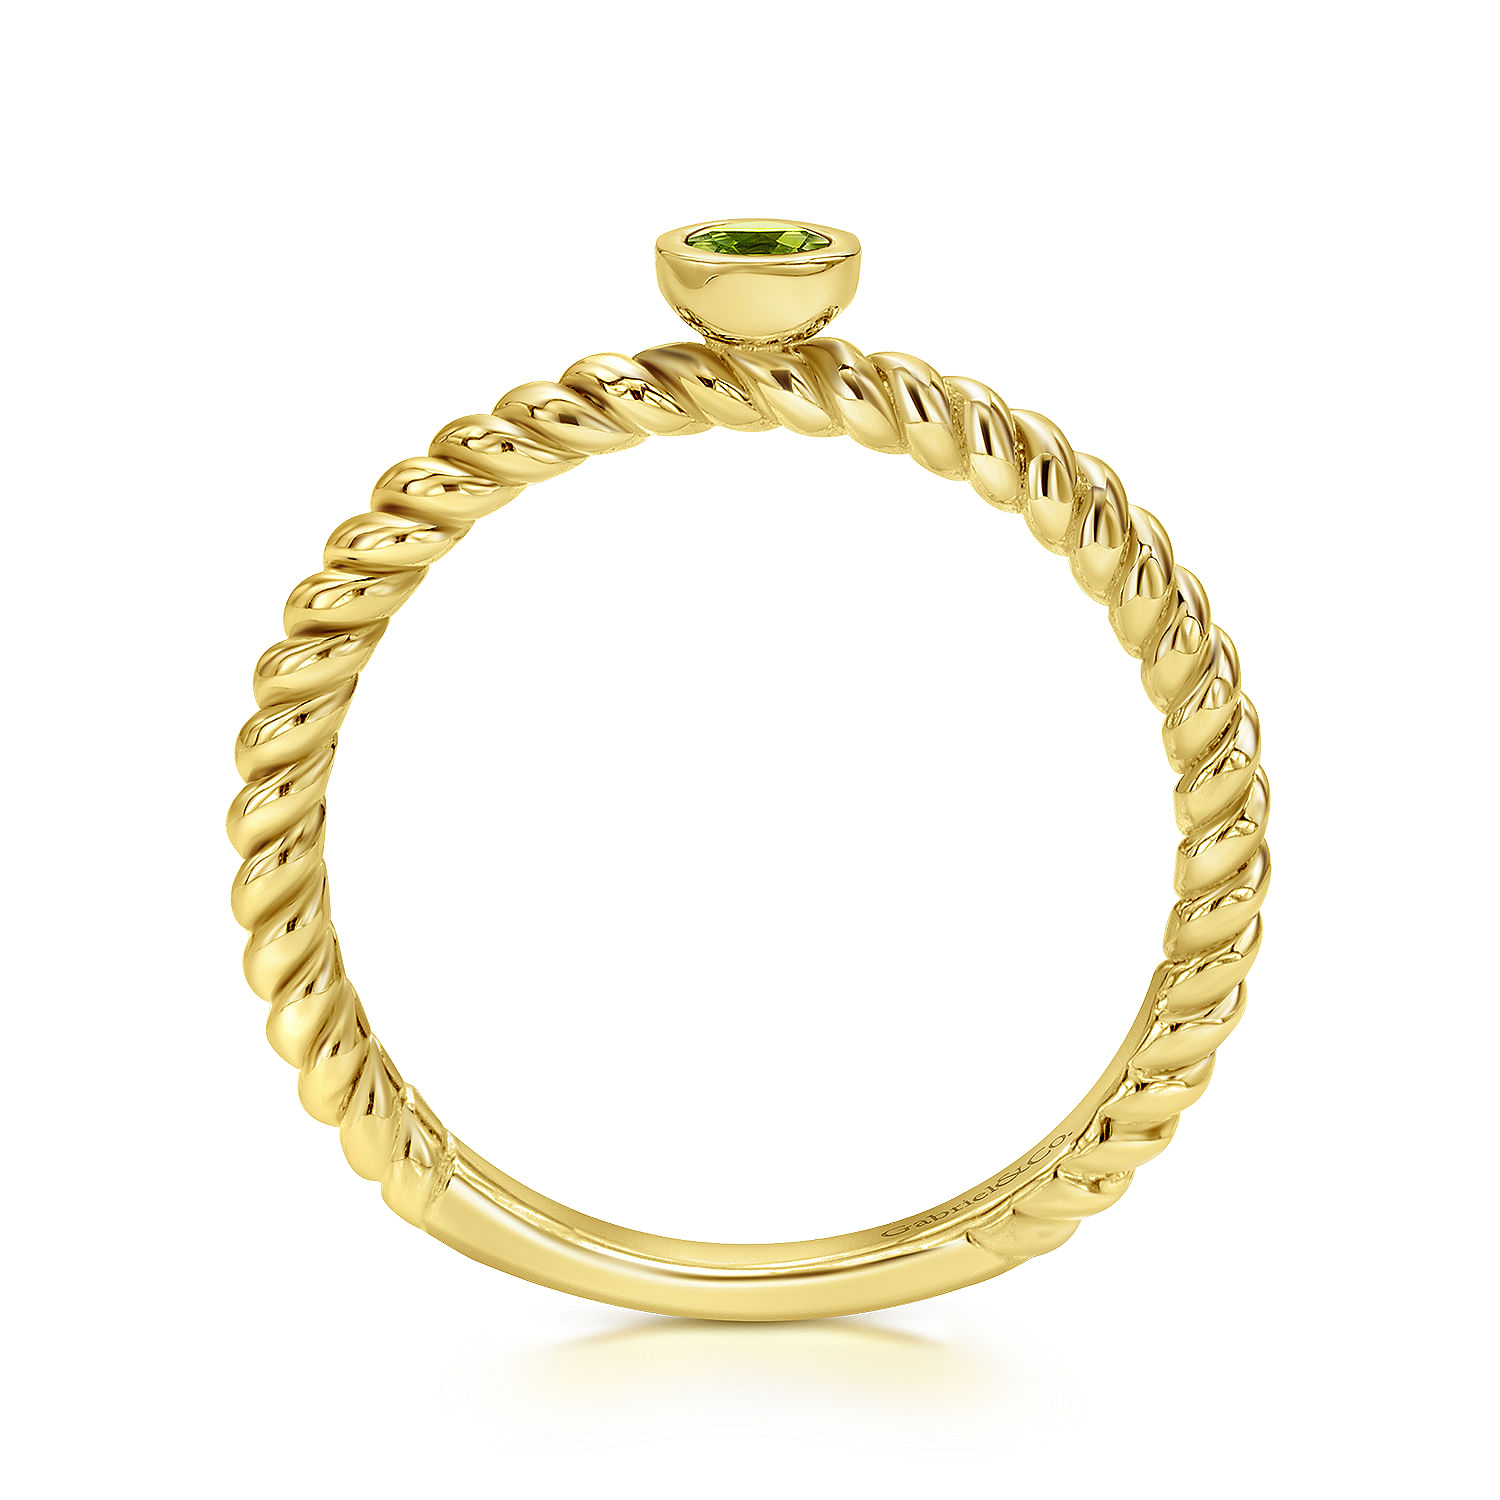 14K Yellow Gold Round Peridot Ring with Twisted Rope Shank